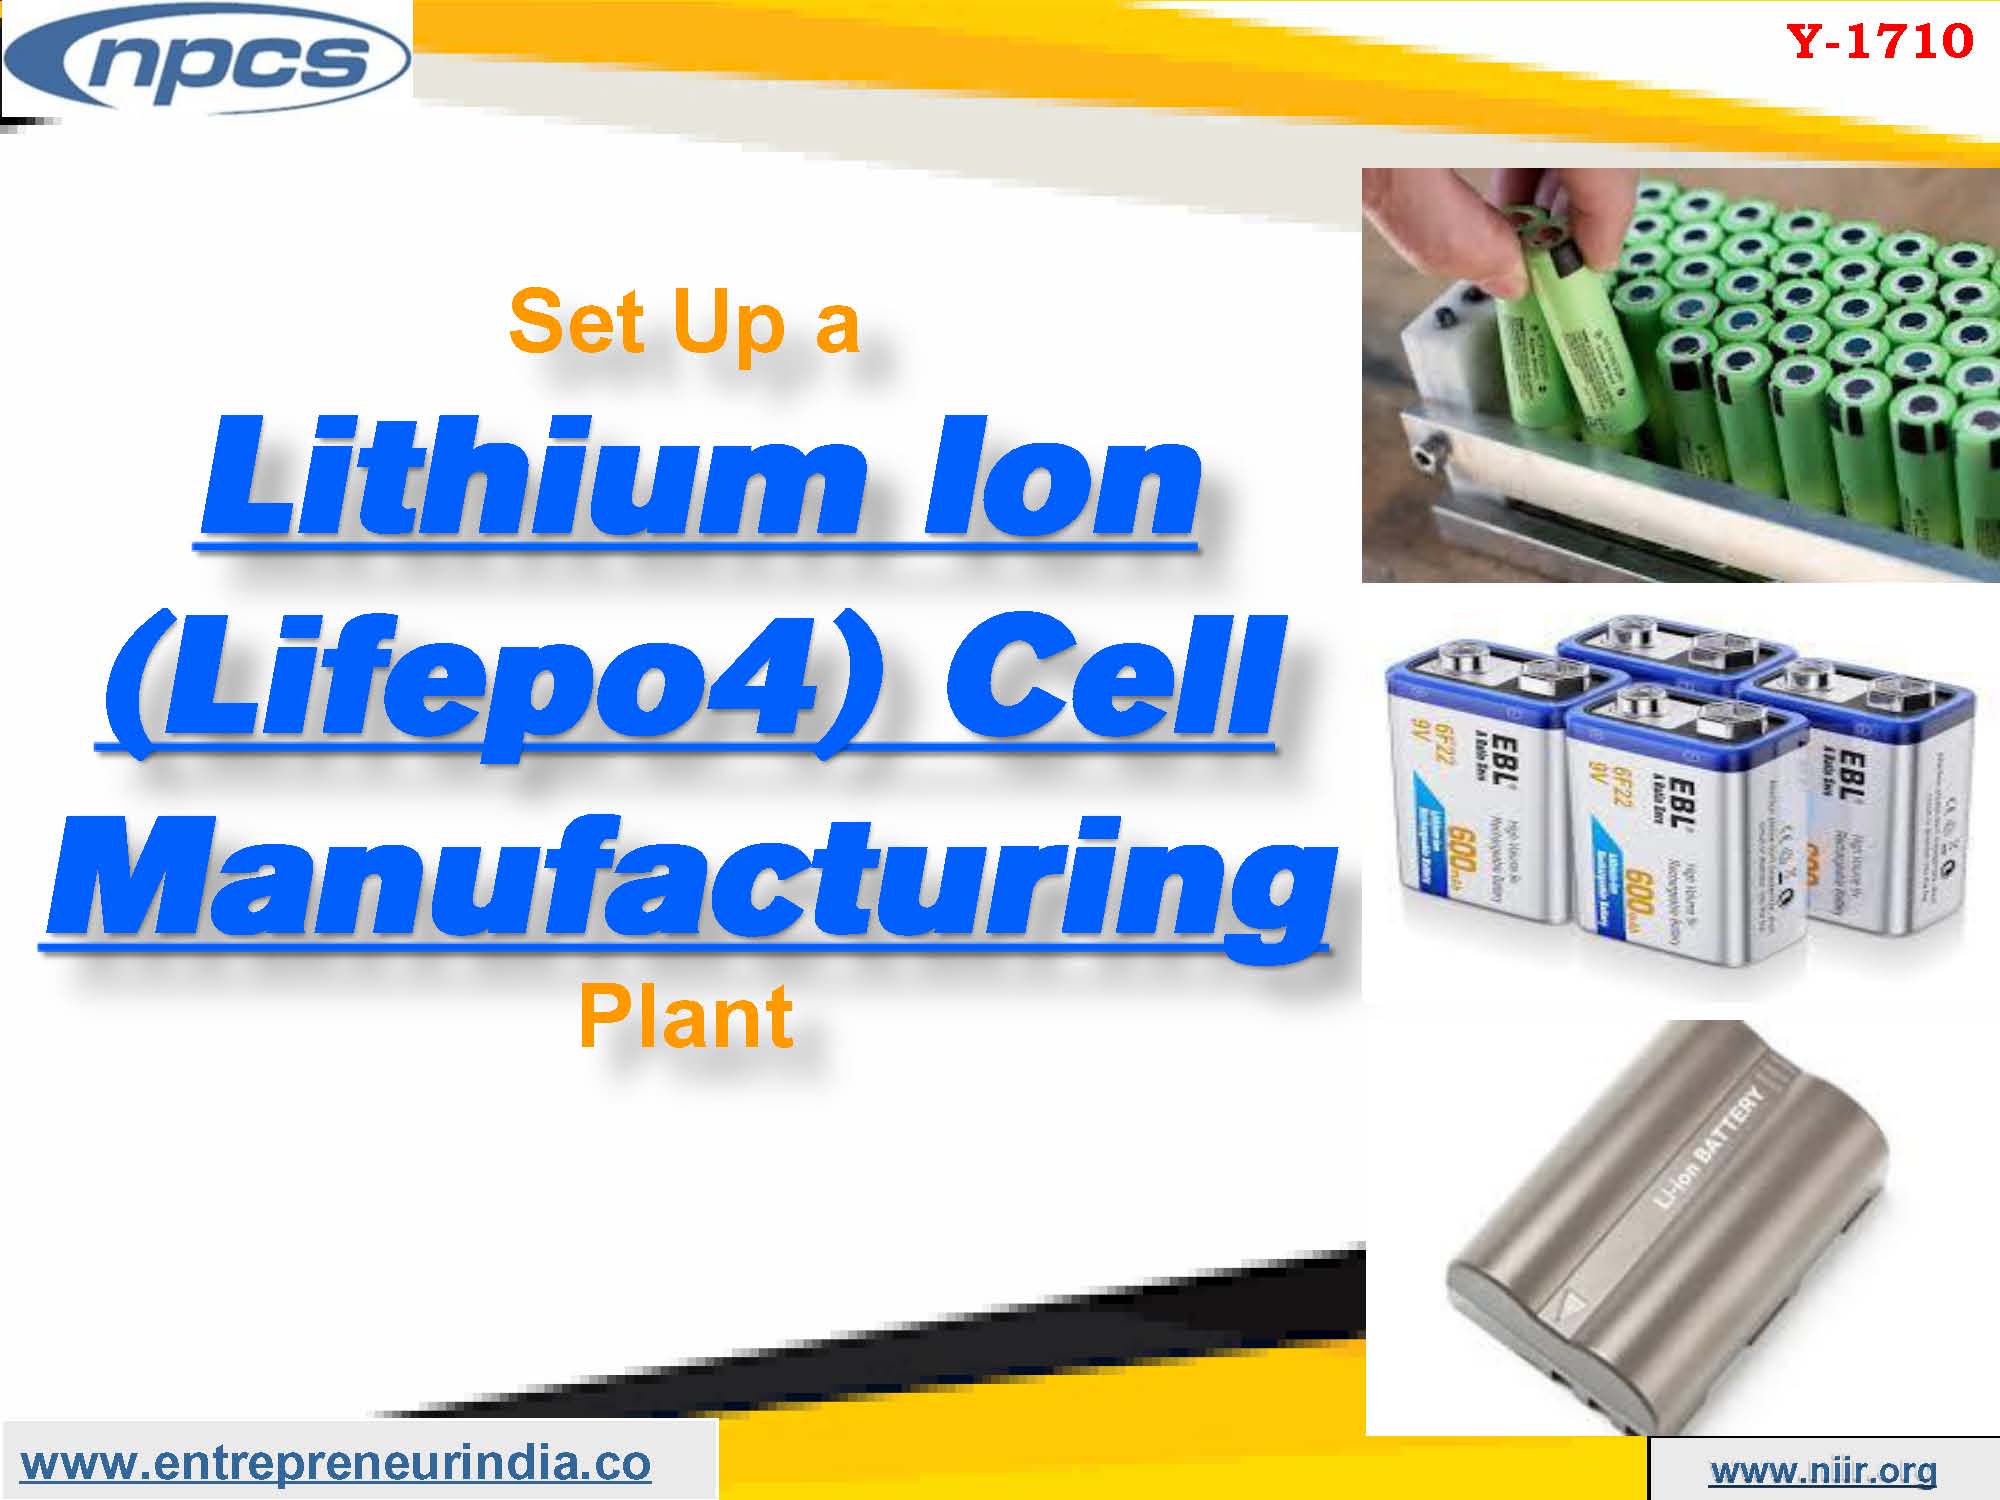 Set Up a Lithium Ion (Lifepo4) Cell Manufacturing Plant